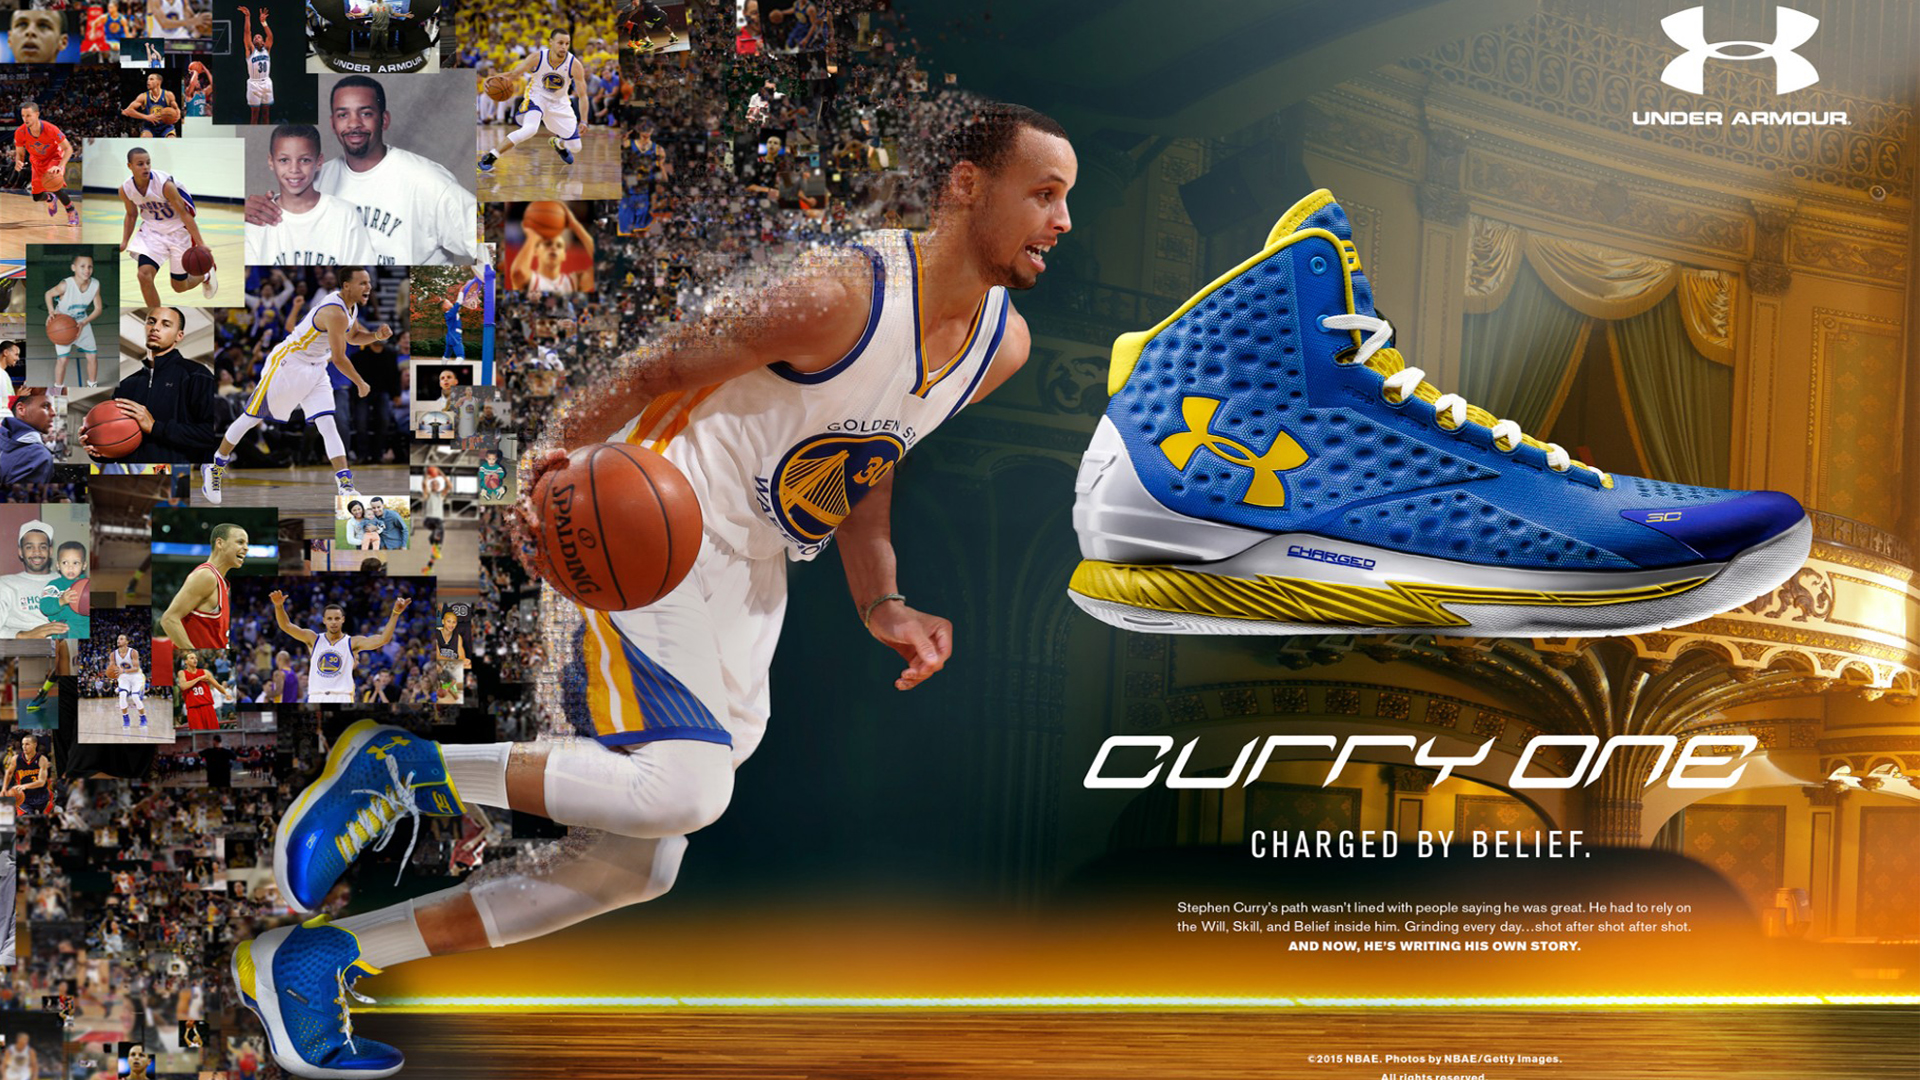 Cool Under Armour Wallpapers 04 of 40 - with Stephen Curry Shoes - HD